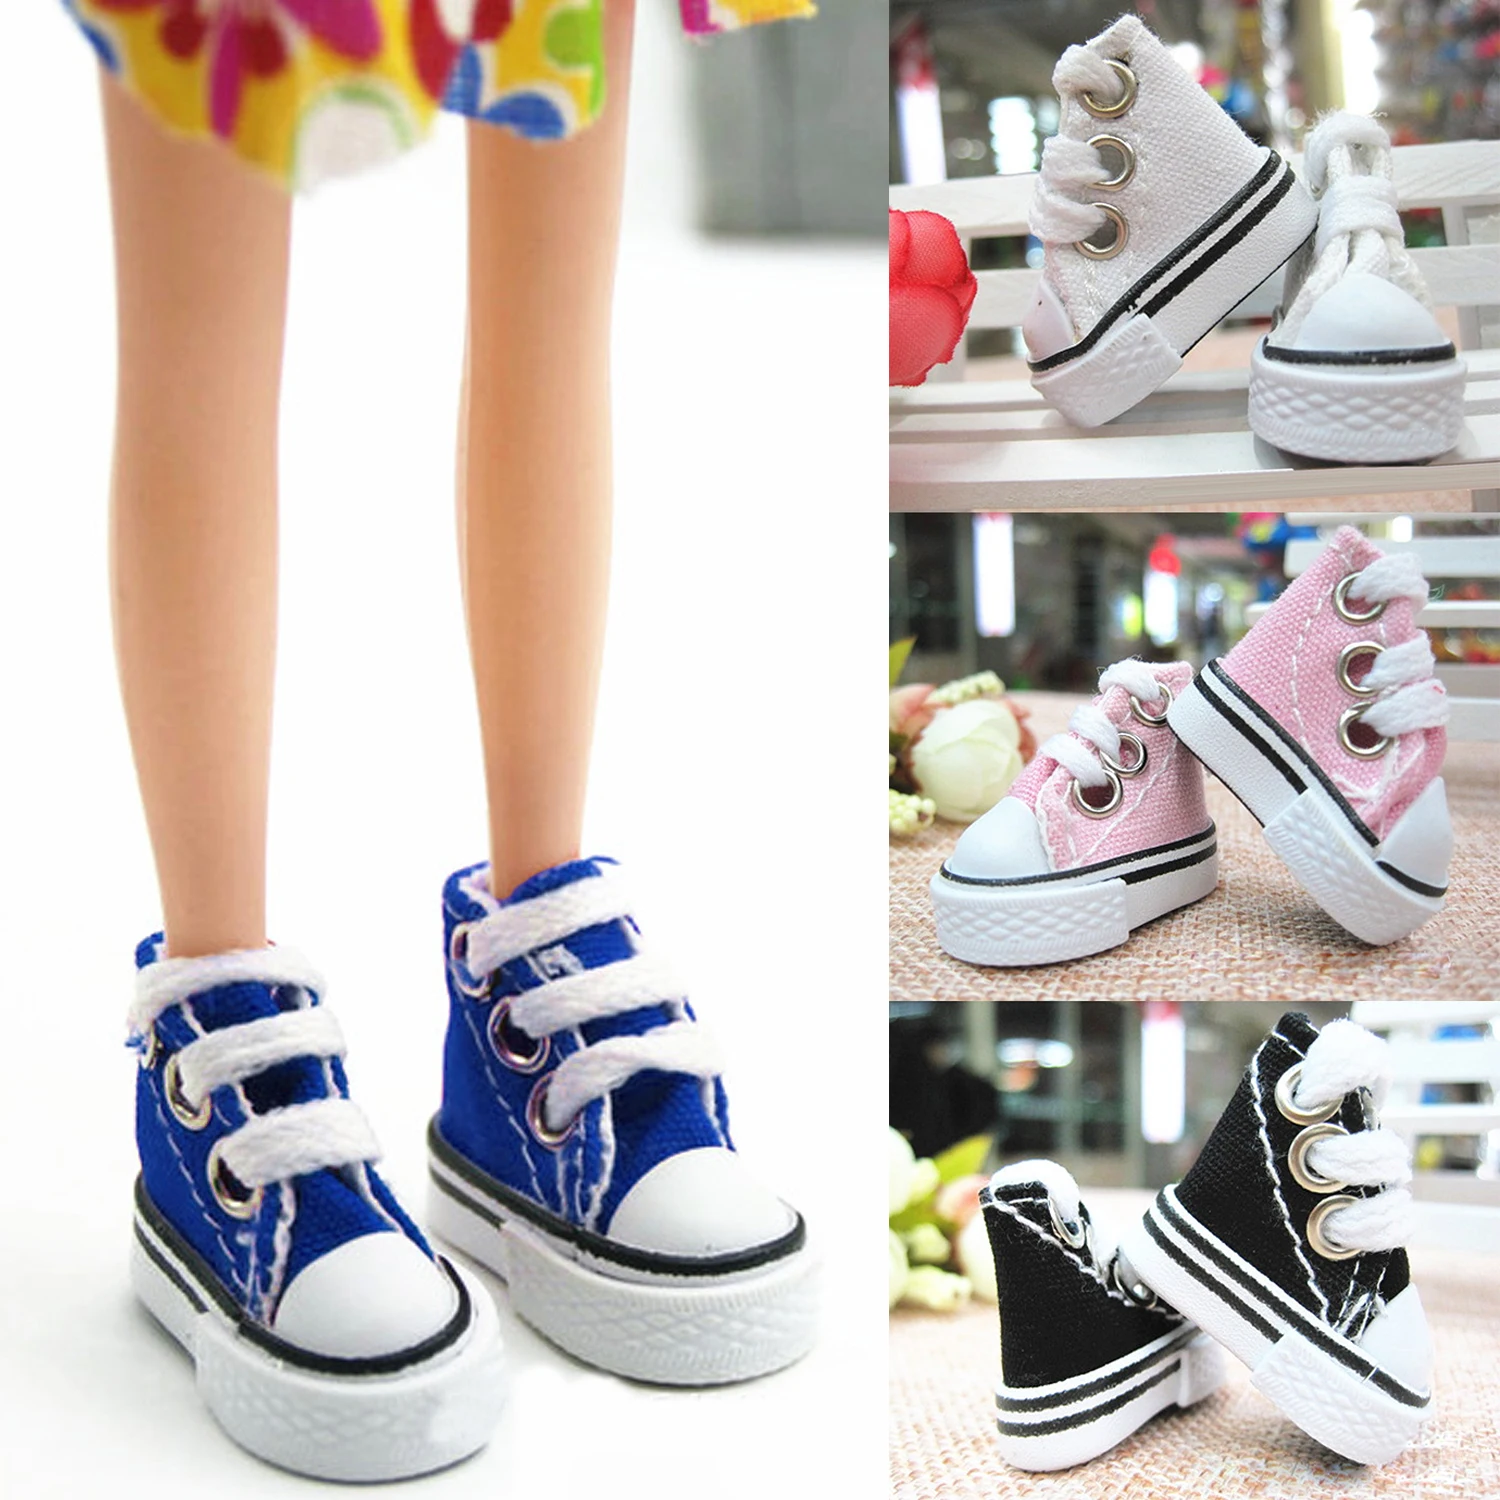 Besegad Kids 1 Pair 3.5cm Mini Doll Canvas Shoes Sneakers Sports Shoes Accessories for Barbie Doll Toy besegad 10pcs kid mini doll display holder model display stand dress support prop up mannequin holder accessories for barbie toy